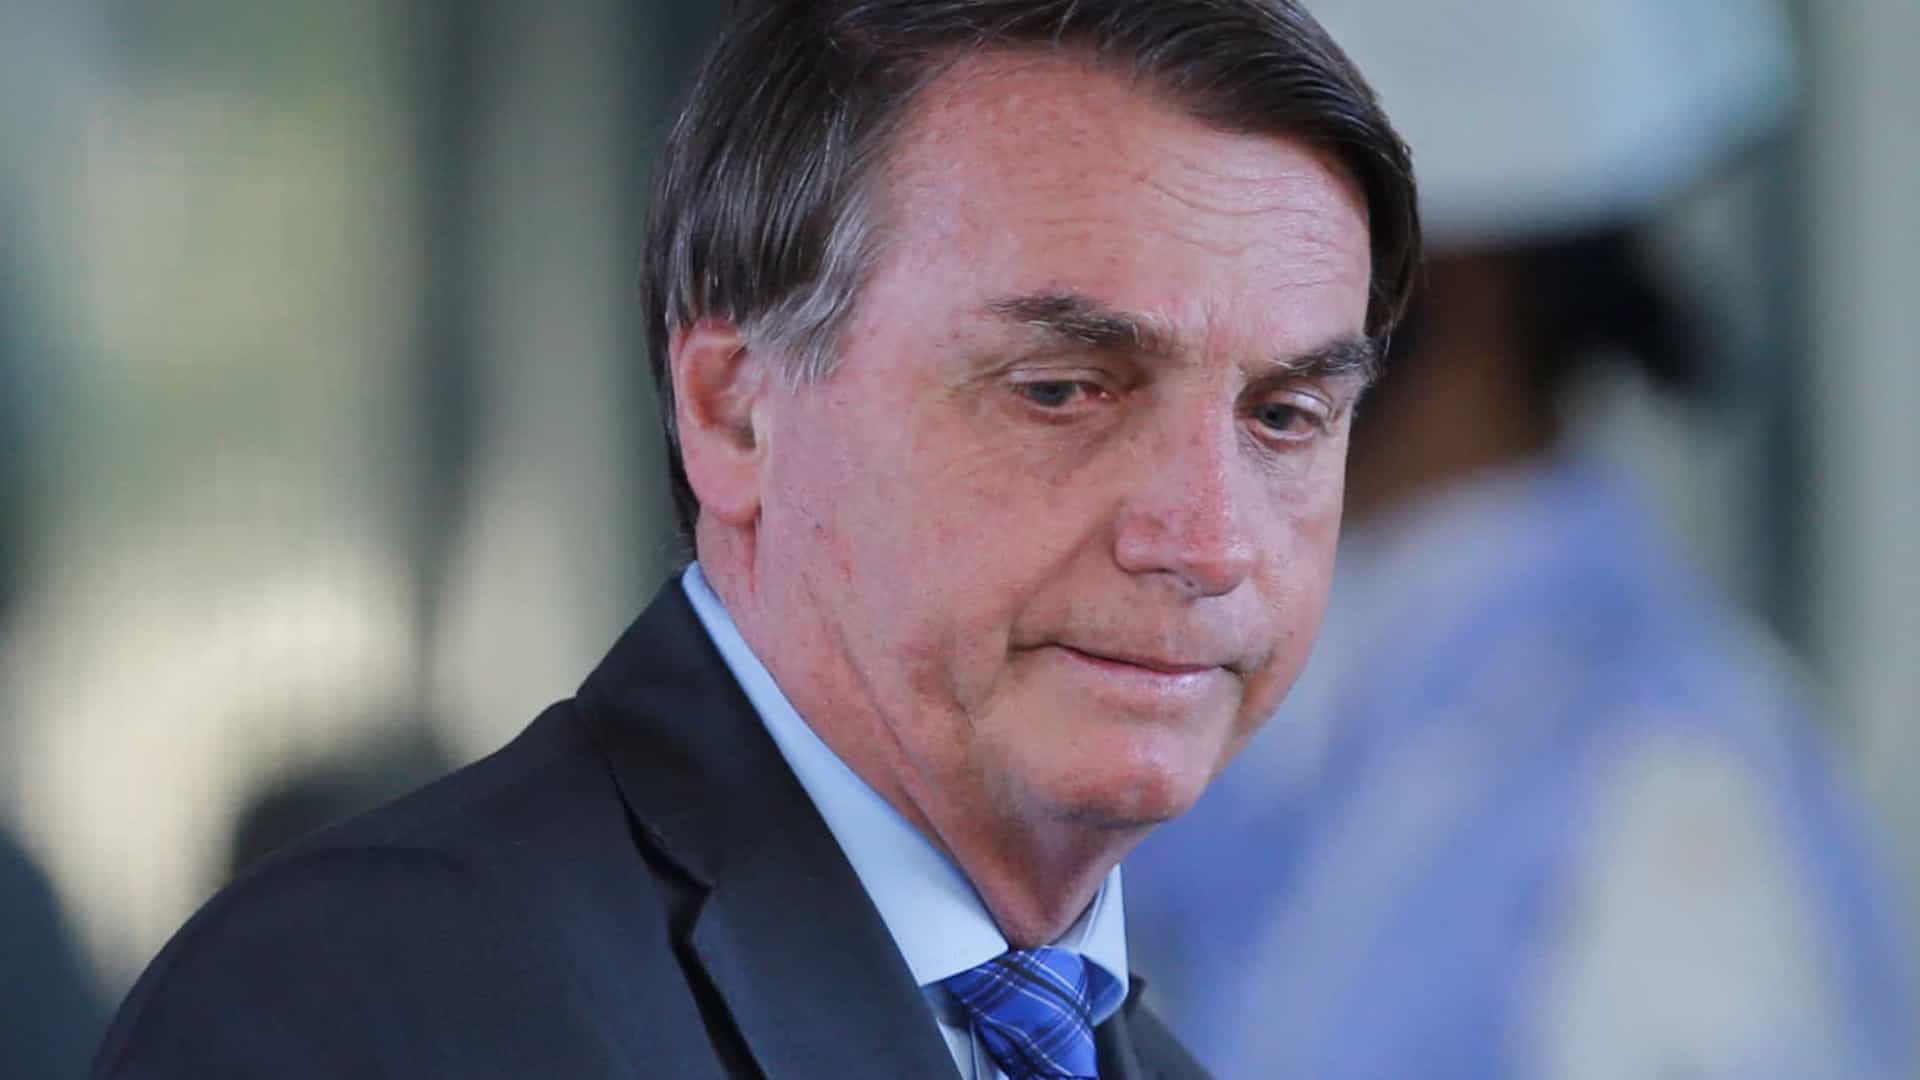 Bolsonaro says they are 'tightening the noose' and 'seizing people's freedom'